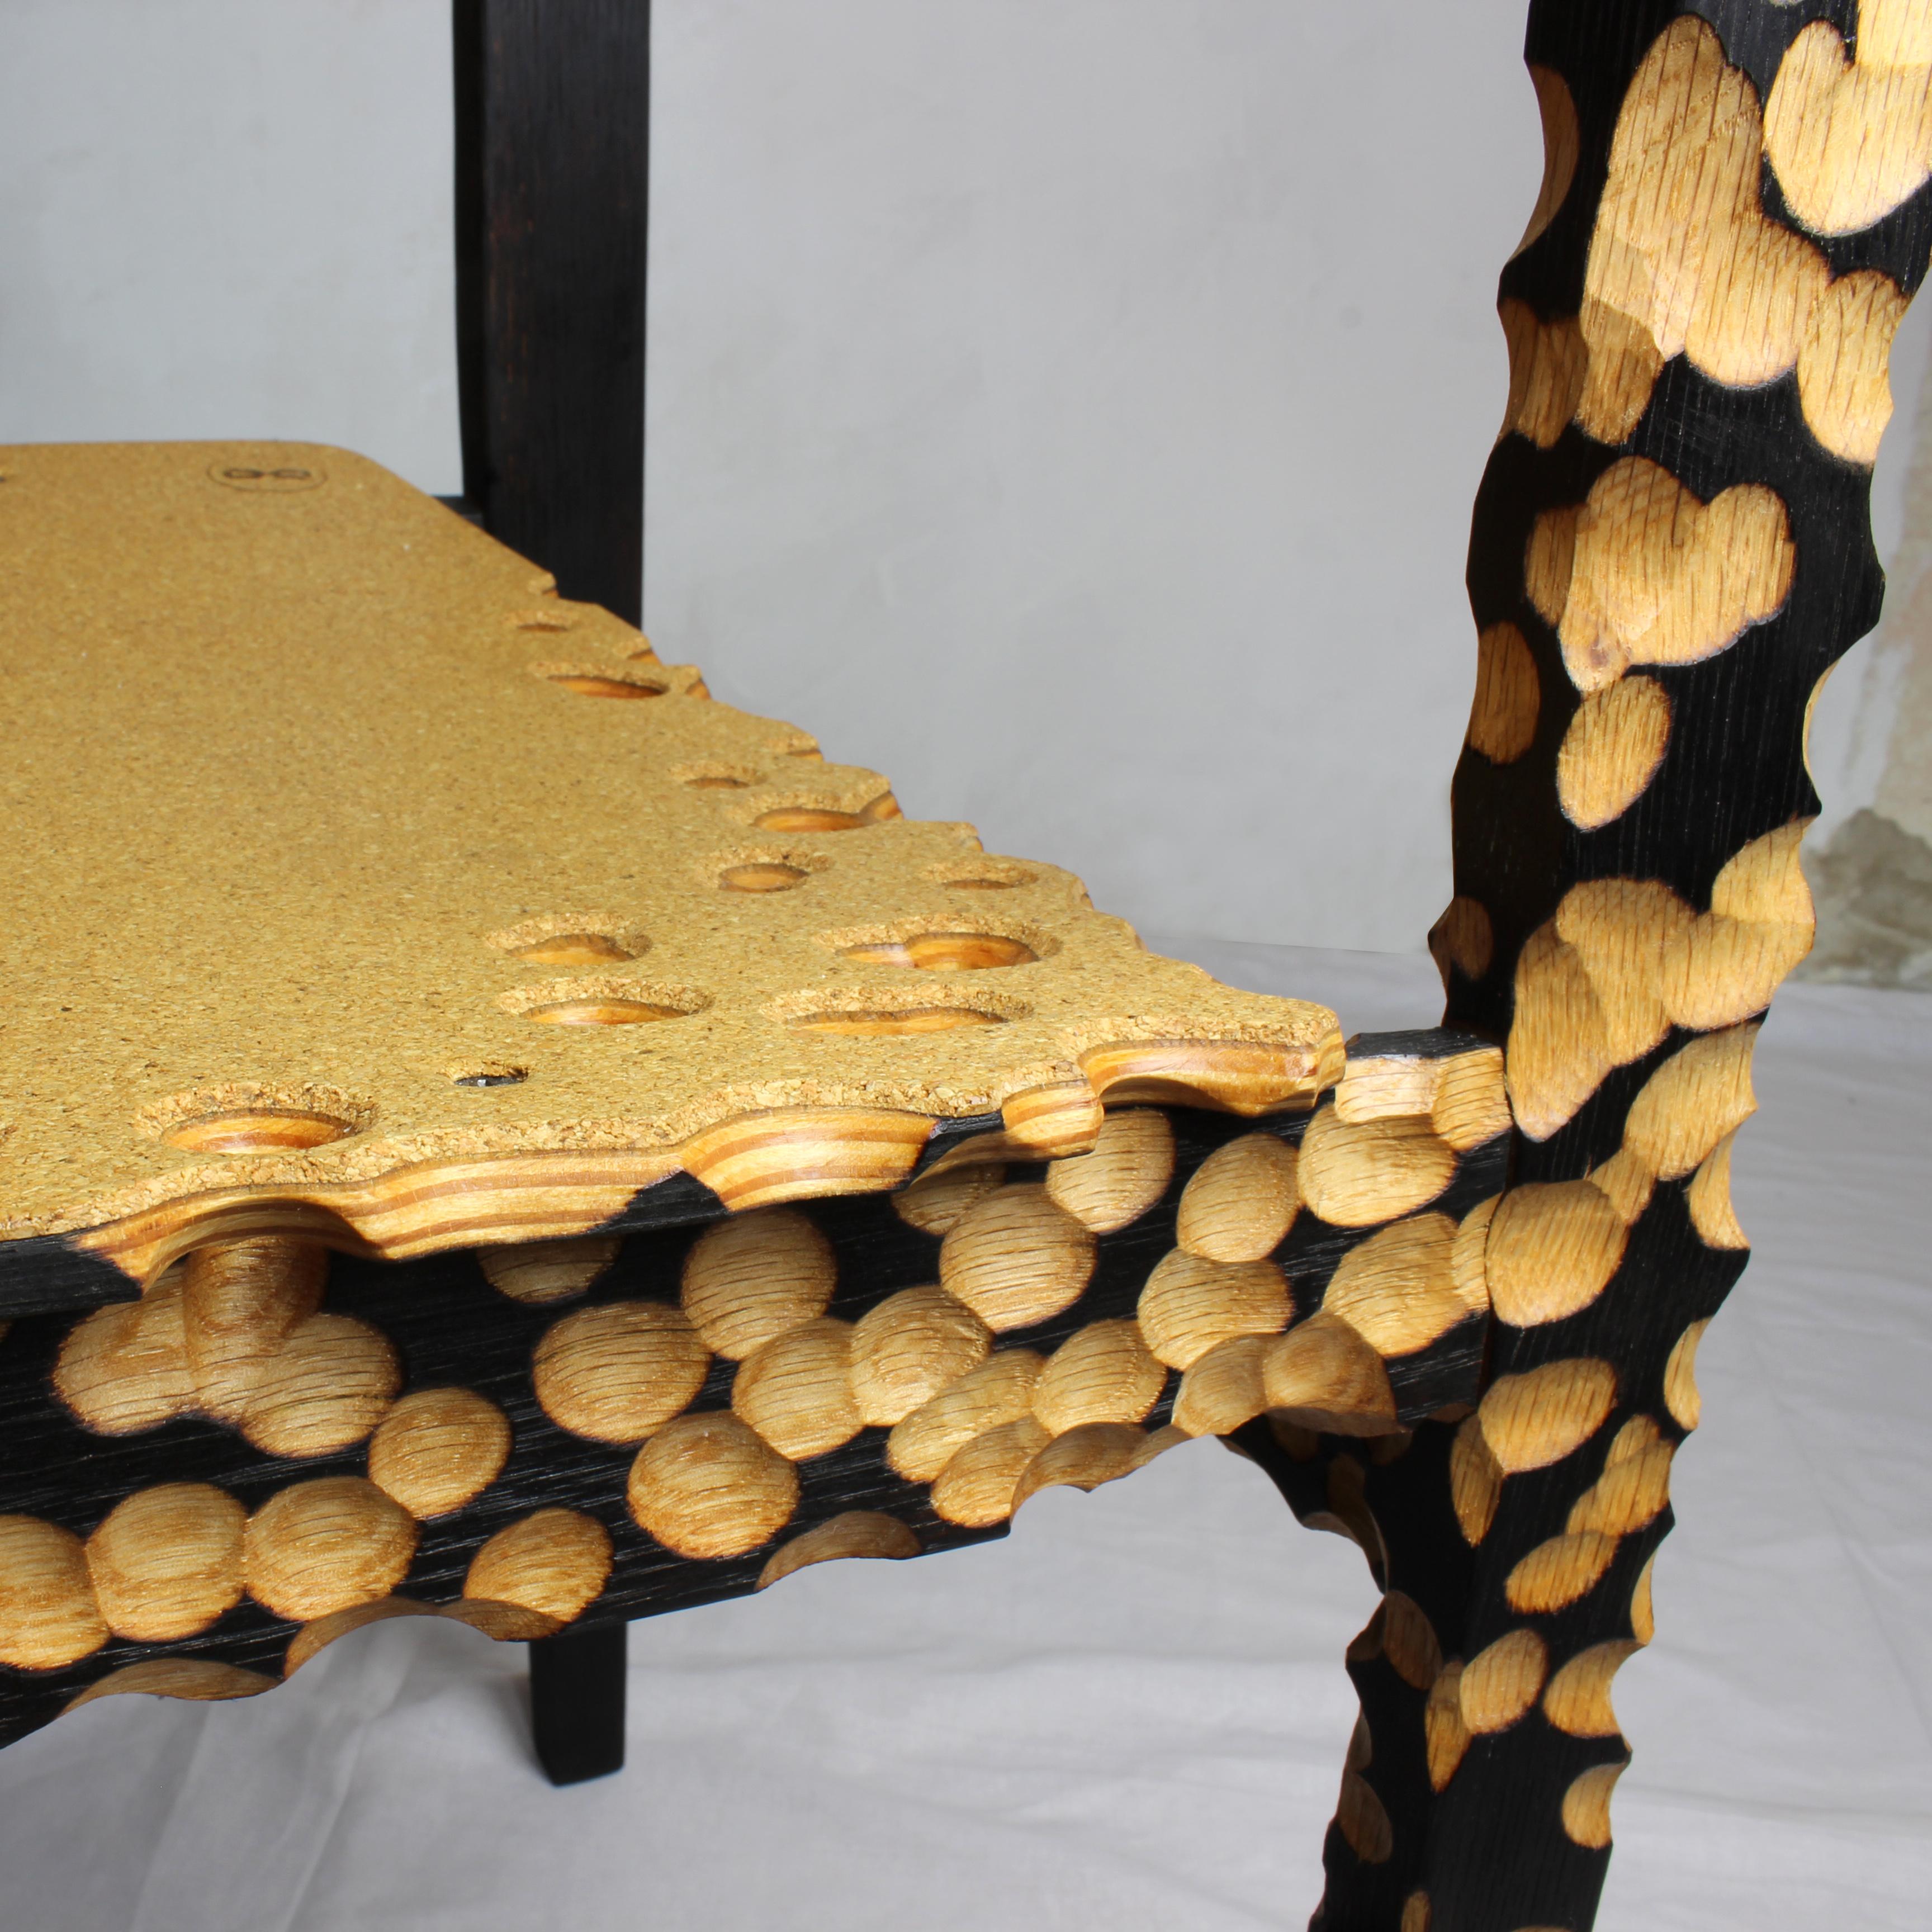 N1 Chair, Unique Sculptured, Charred Furniture, from Salvaged Chair and Cork For Sale 4